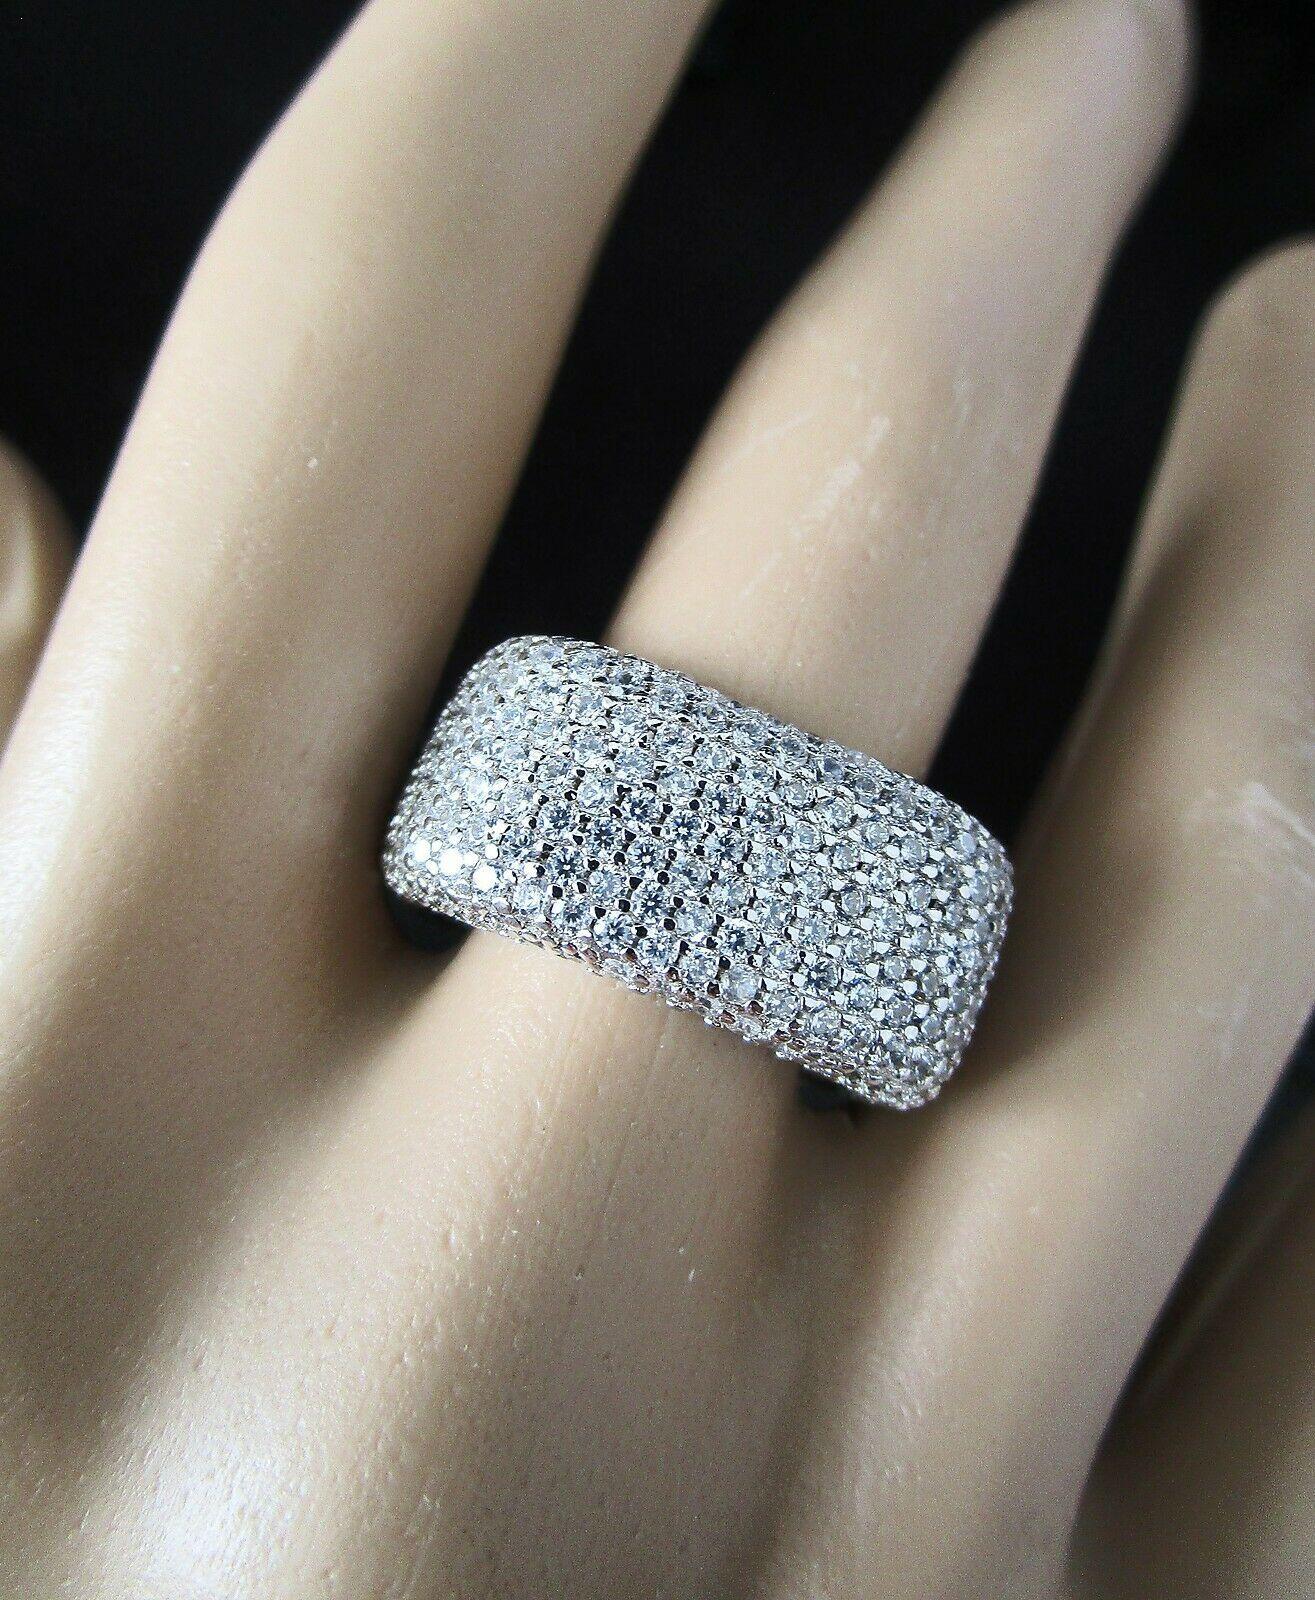 Simply Beautiful! Show Stopper Glistening Crystal Sterling Silver Cocktail Ring. Pave Hand set overall with 450 Sparkling AAA Ice CZ Cubic Zirconium all the way around. Beautifully crafted Square Sterling Silver mounting. Ring Size 8. Classic and